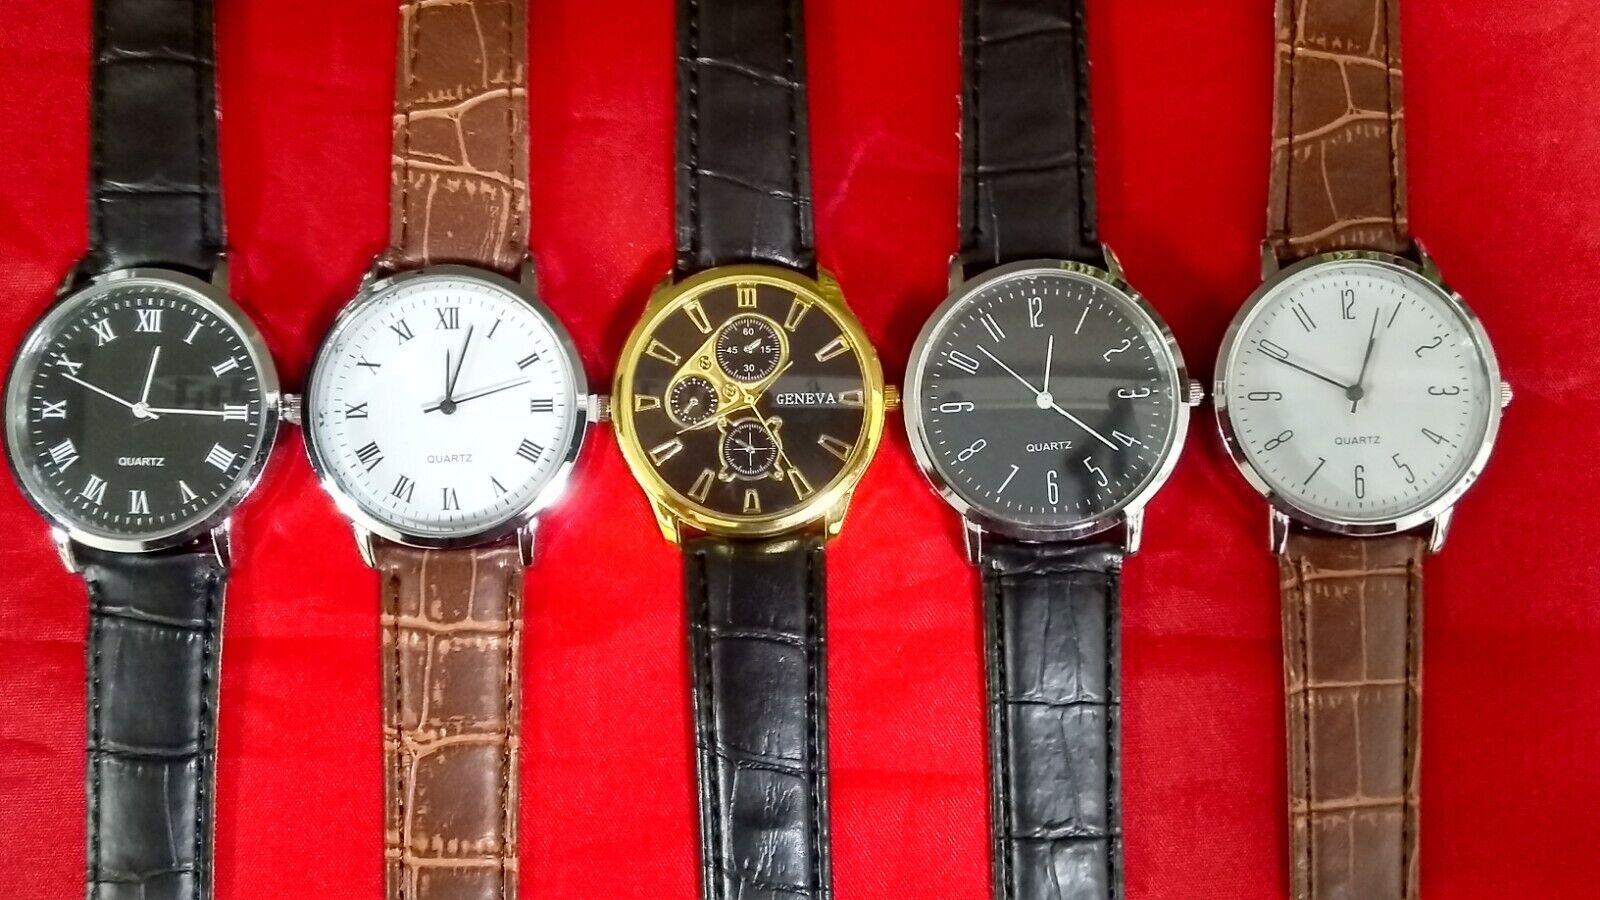 5 Brand NEW Men's Watches 10 FREE SPARE BATTERIES lot Watch  # 43211234 Unbranded - фотография #3